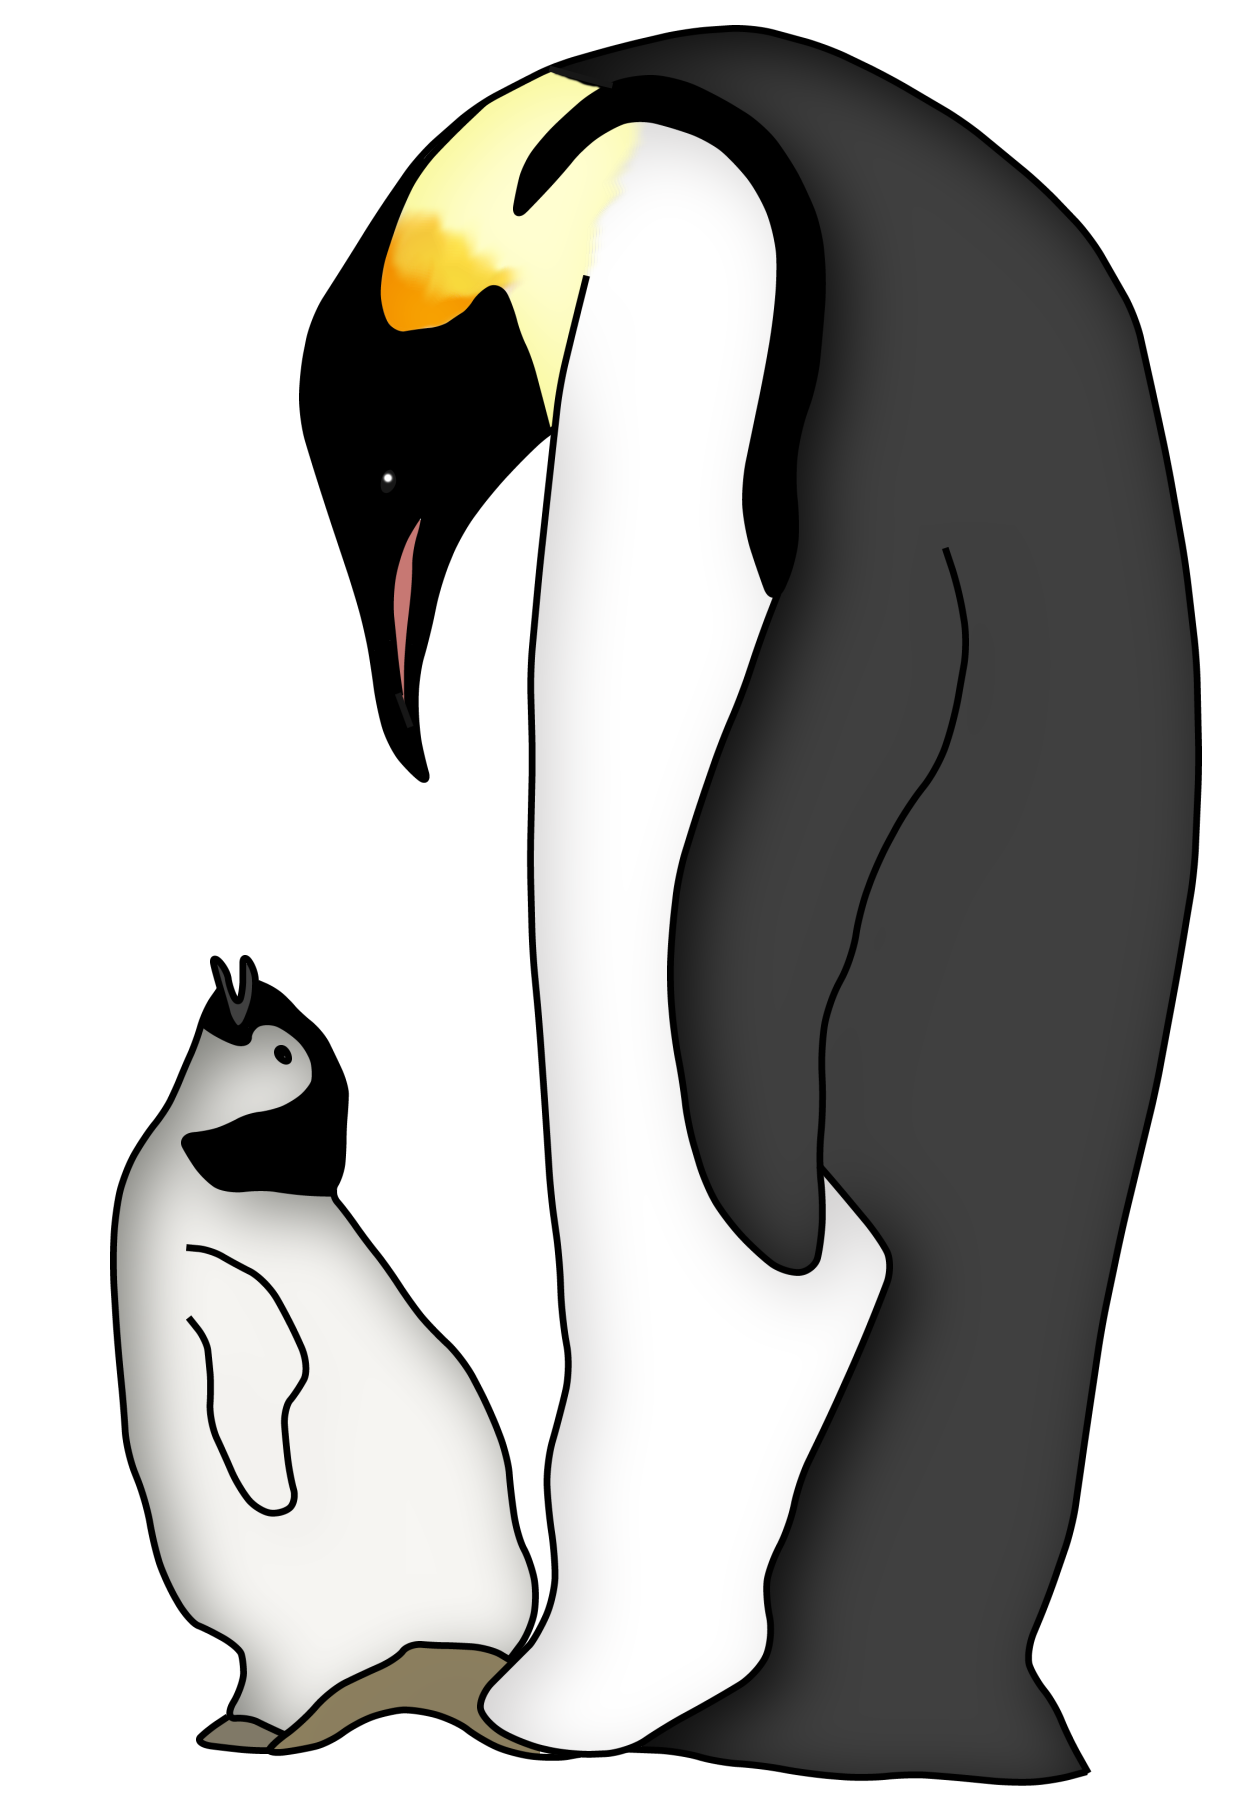 Penguins are peculiar and. Clipart penquin writing